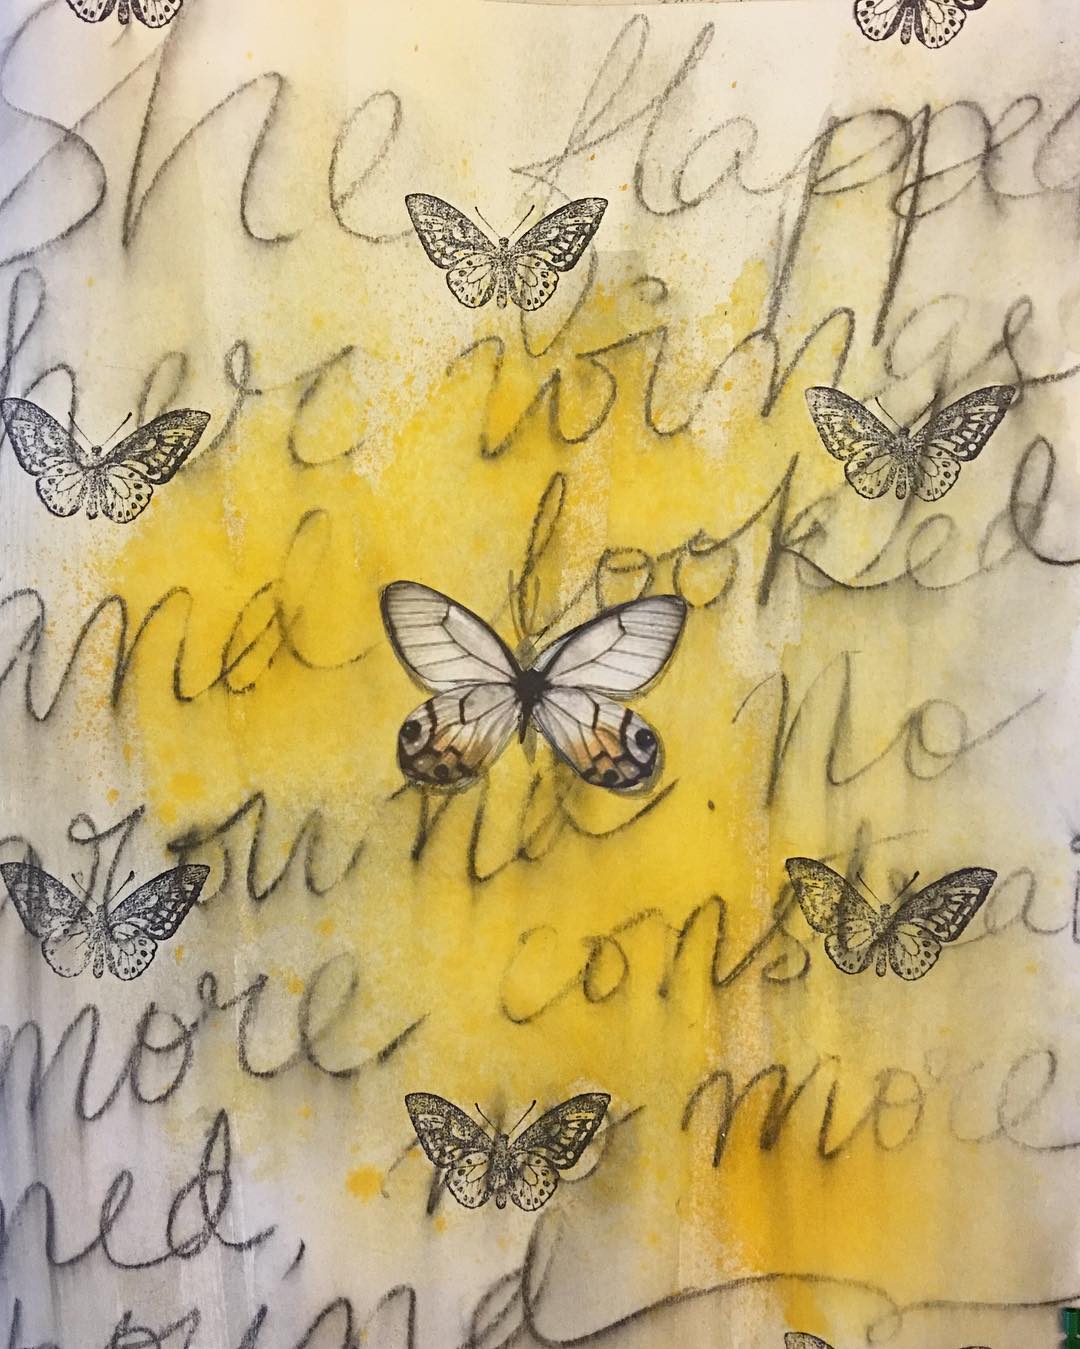 Daily Art Journaling ~ Day 53

She flapped her wings and looked around...
No more constrained, no more bound... @ranger_ink